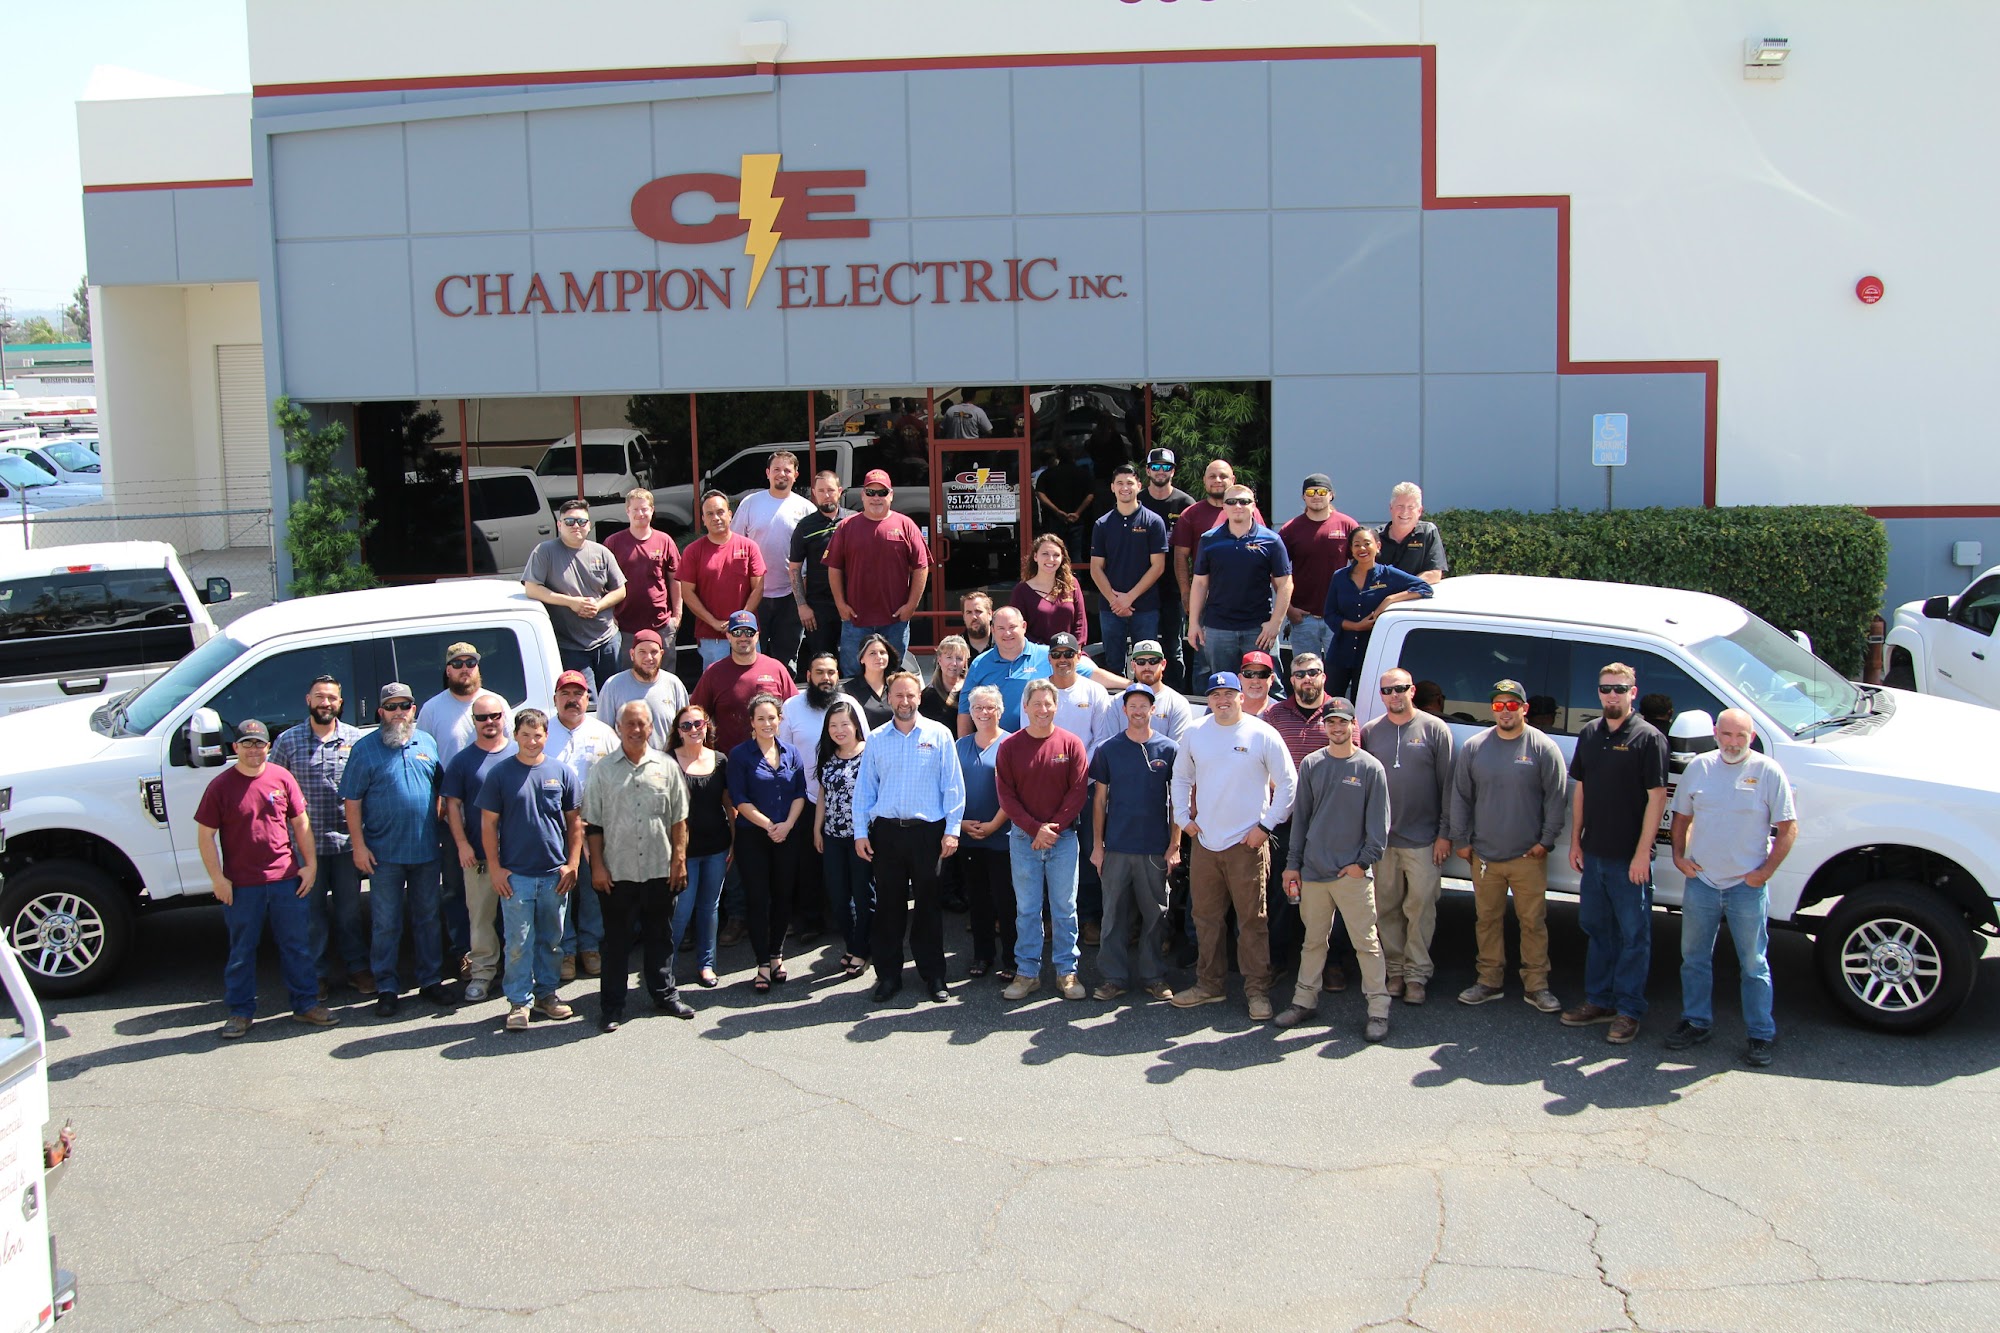 Champion Electric Inc. - Business Page